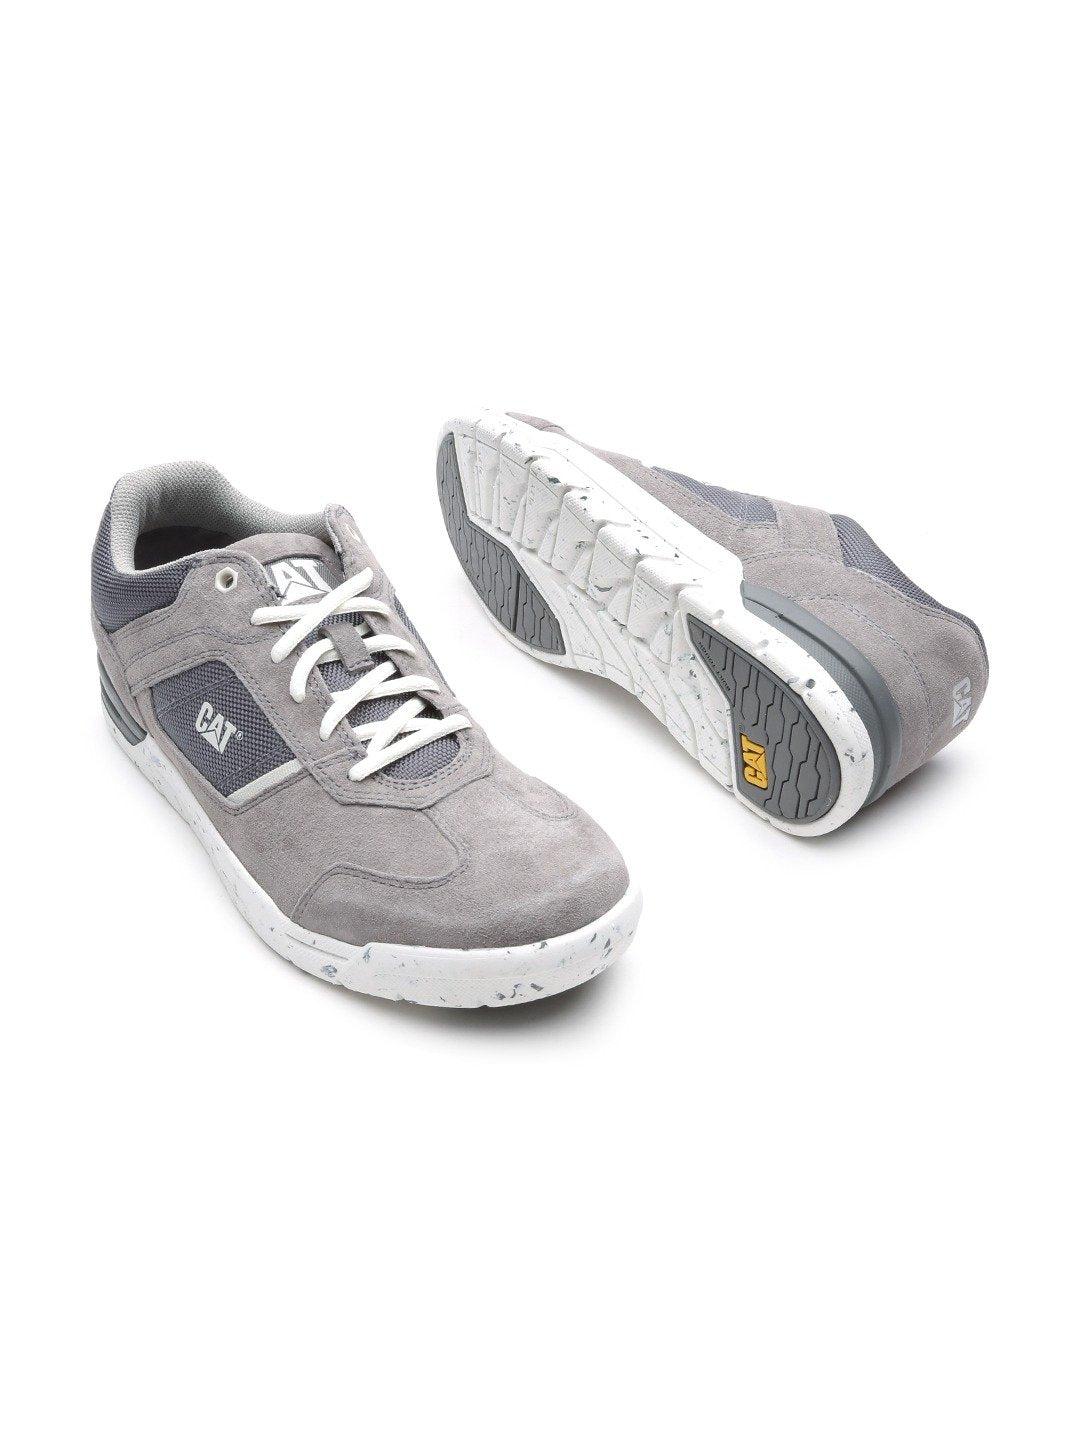 Men Grey Chasm Wolverine Leather Sneakers - Discount Store